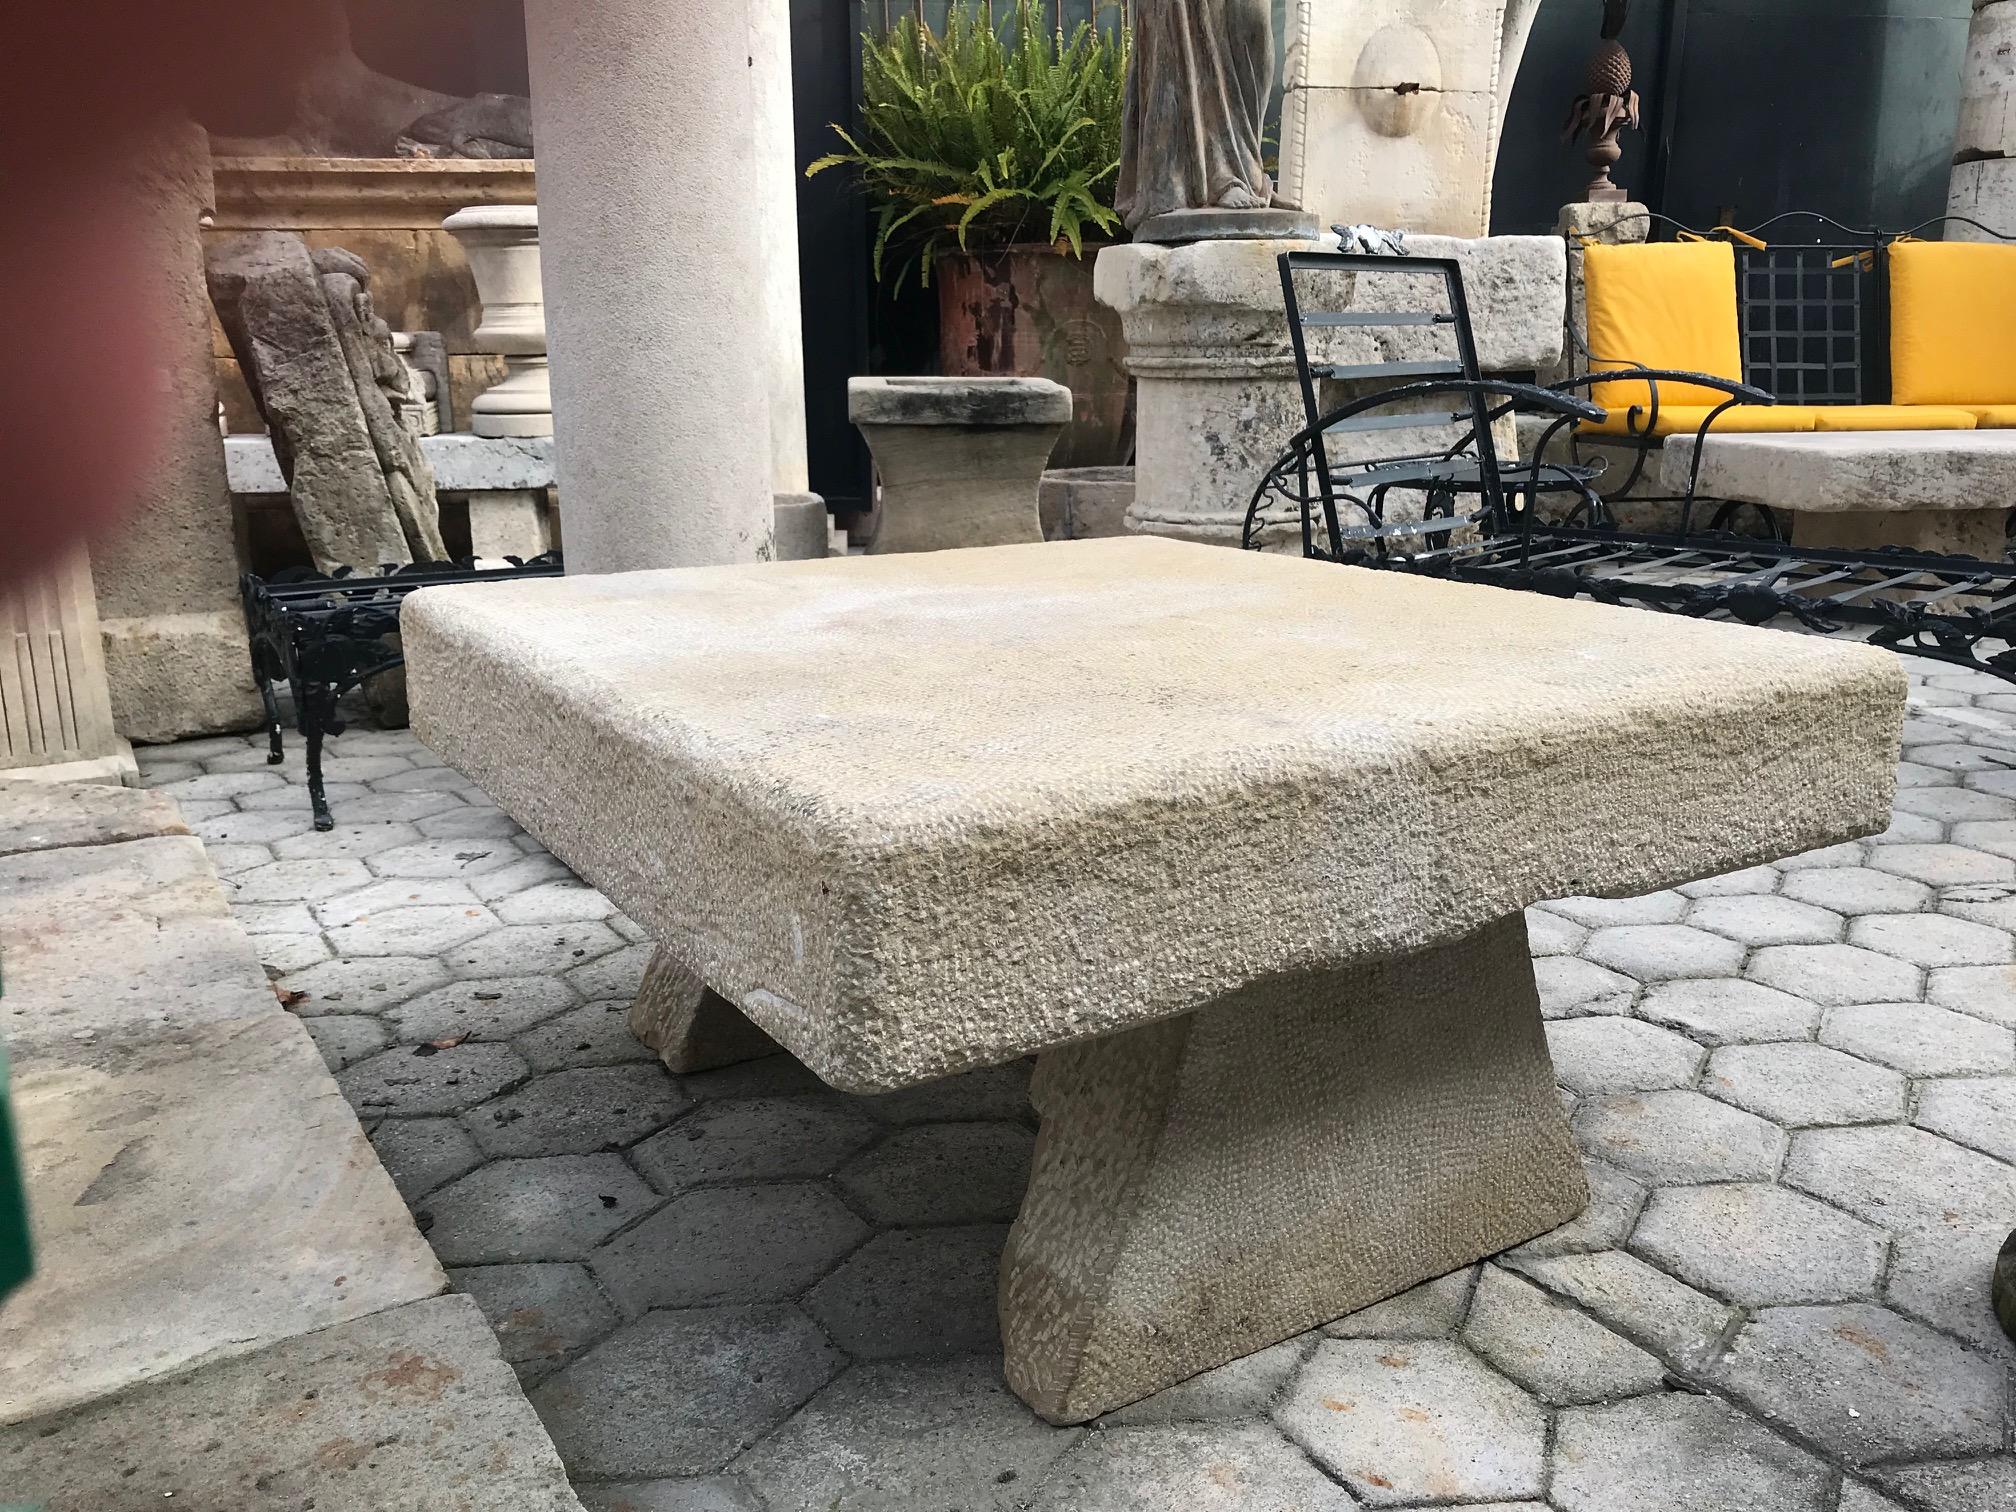 19th-early 20th elements Hand carved stone antique garden low coffee outdoor indoor table. It will be the perfect touch by an outdoor fireplace, this table has a lot of charm and character. It can work in a Mid-Century Modern or an old charm rustic